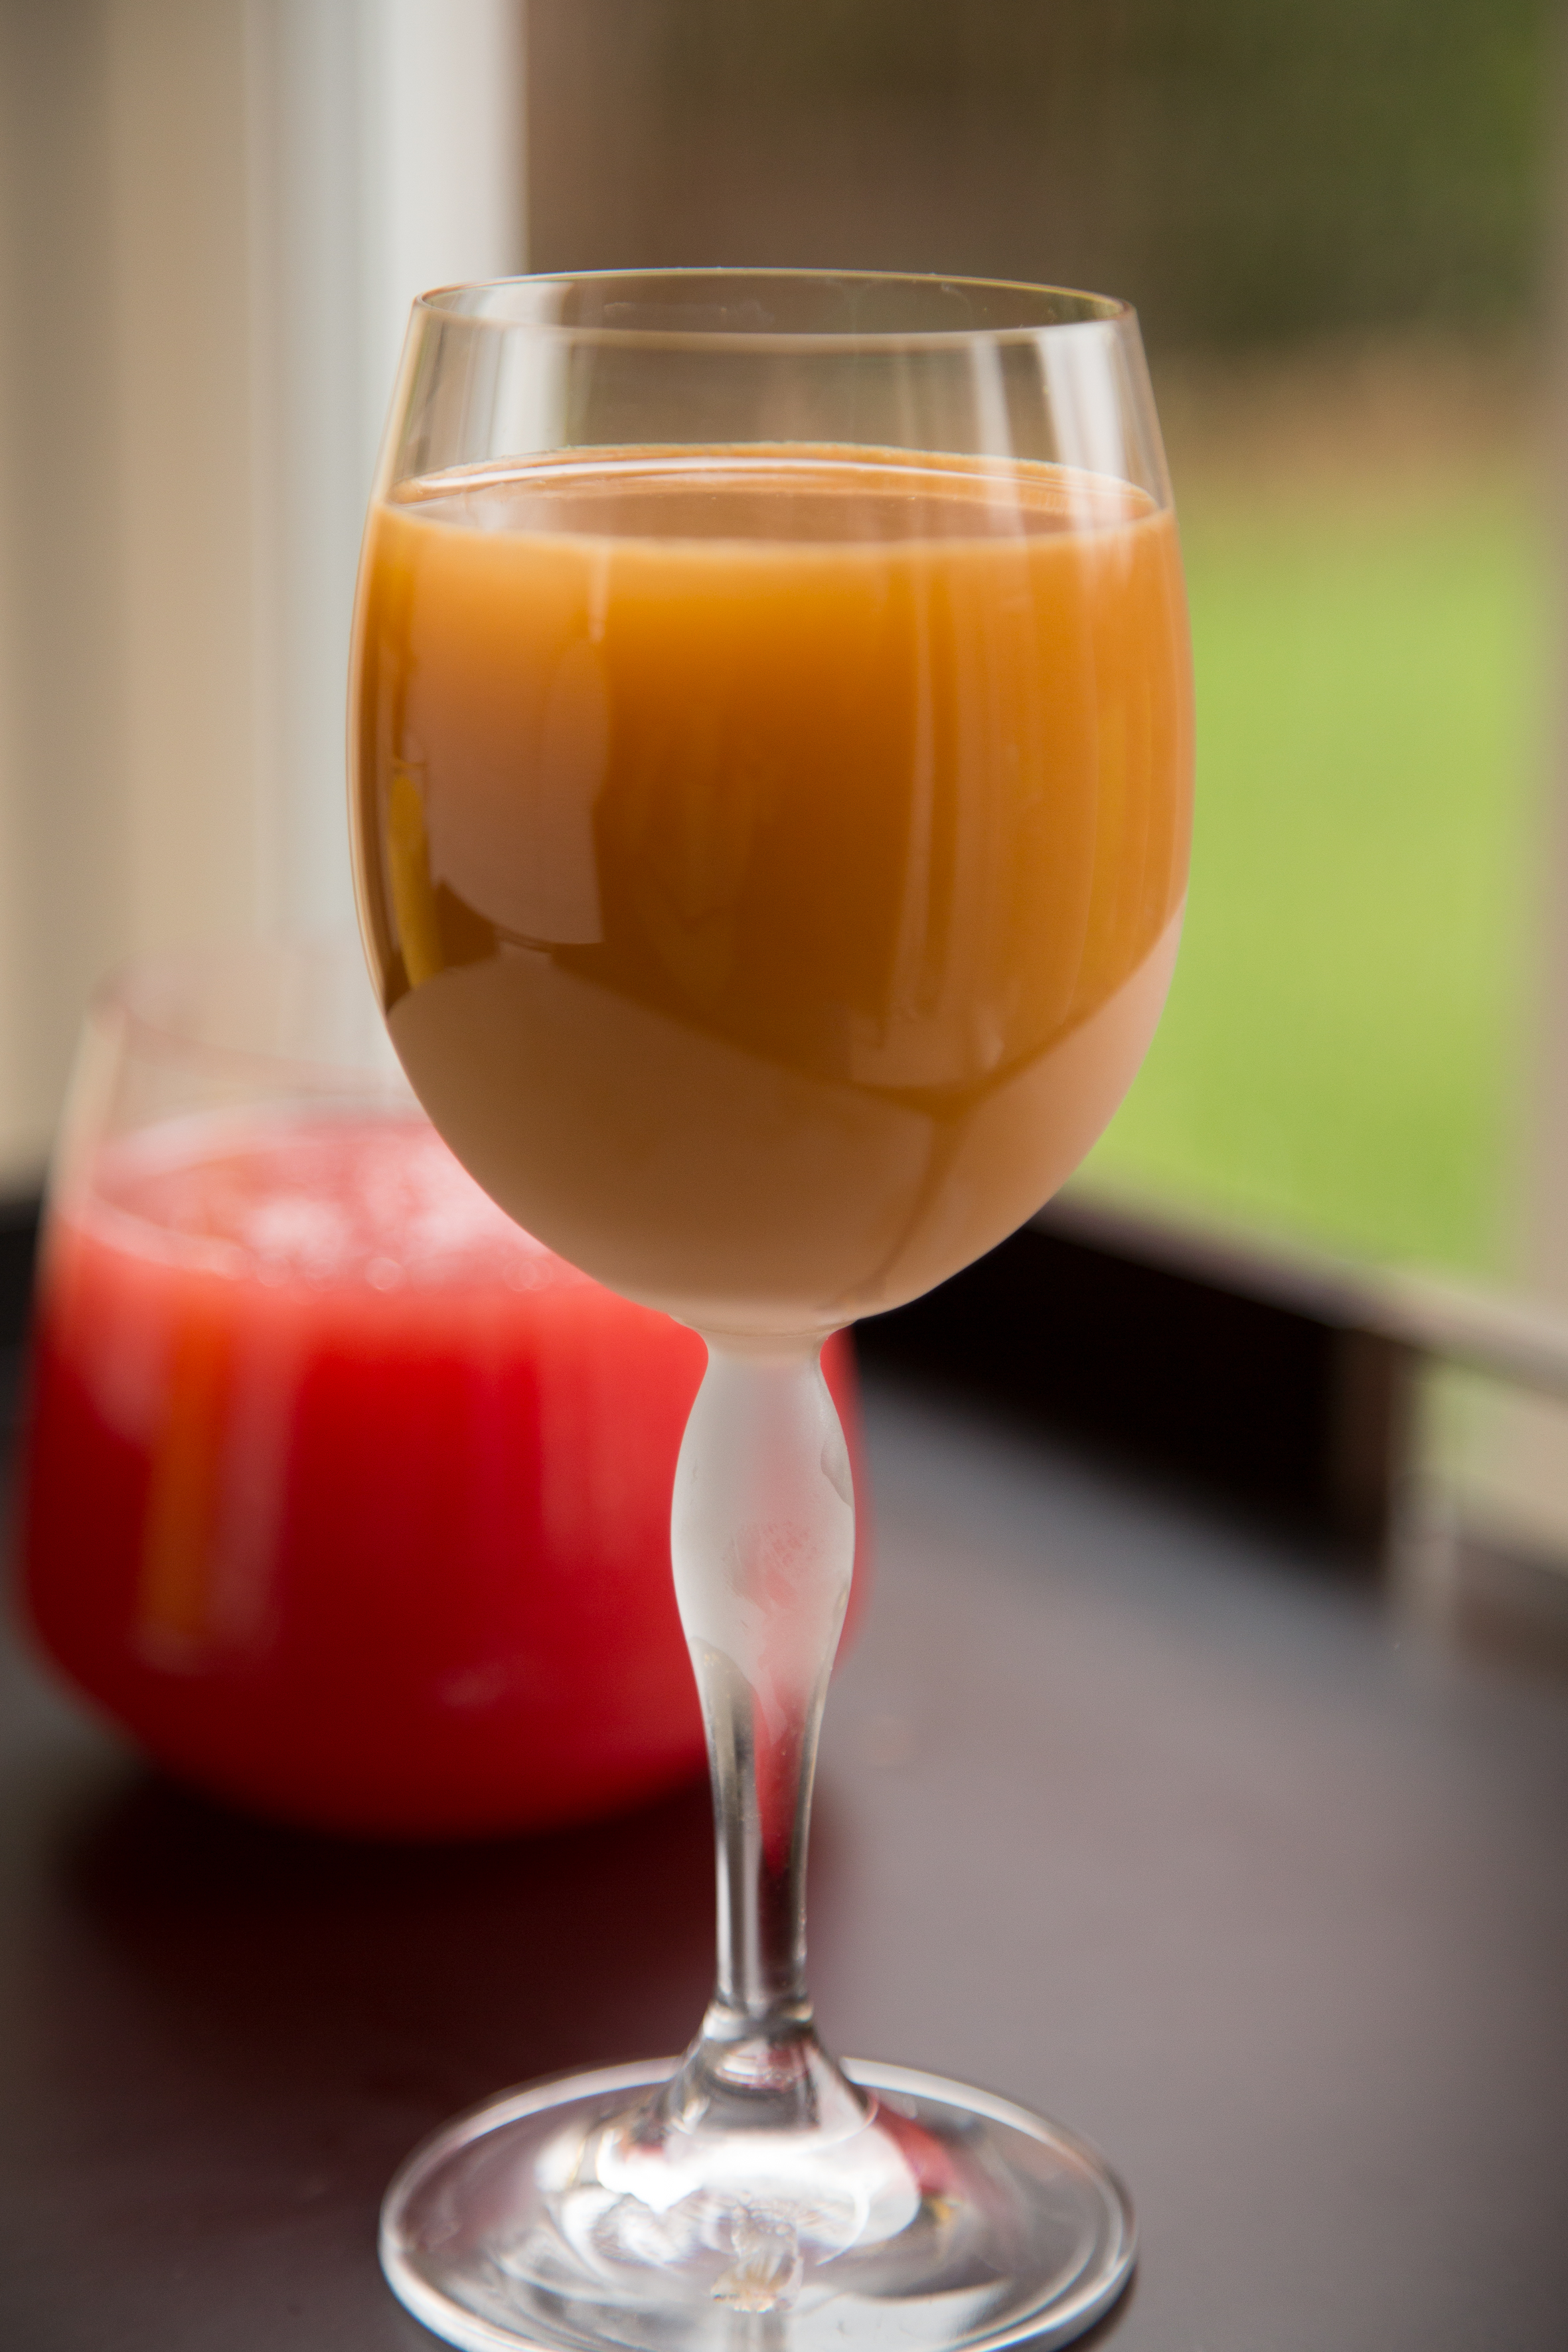 Apple and Carrot Juice